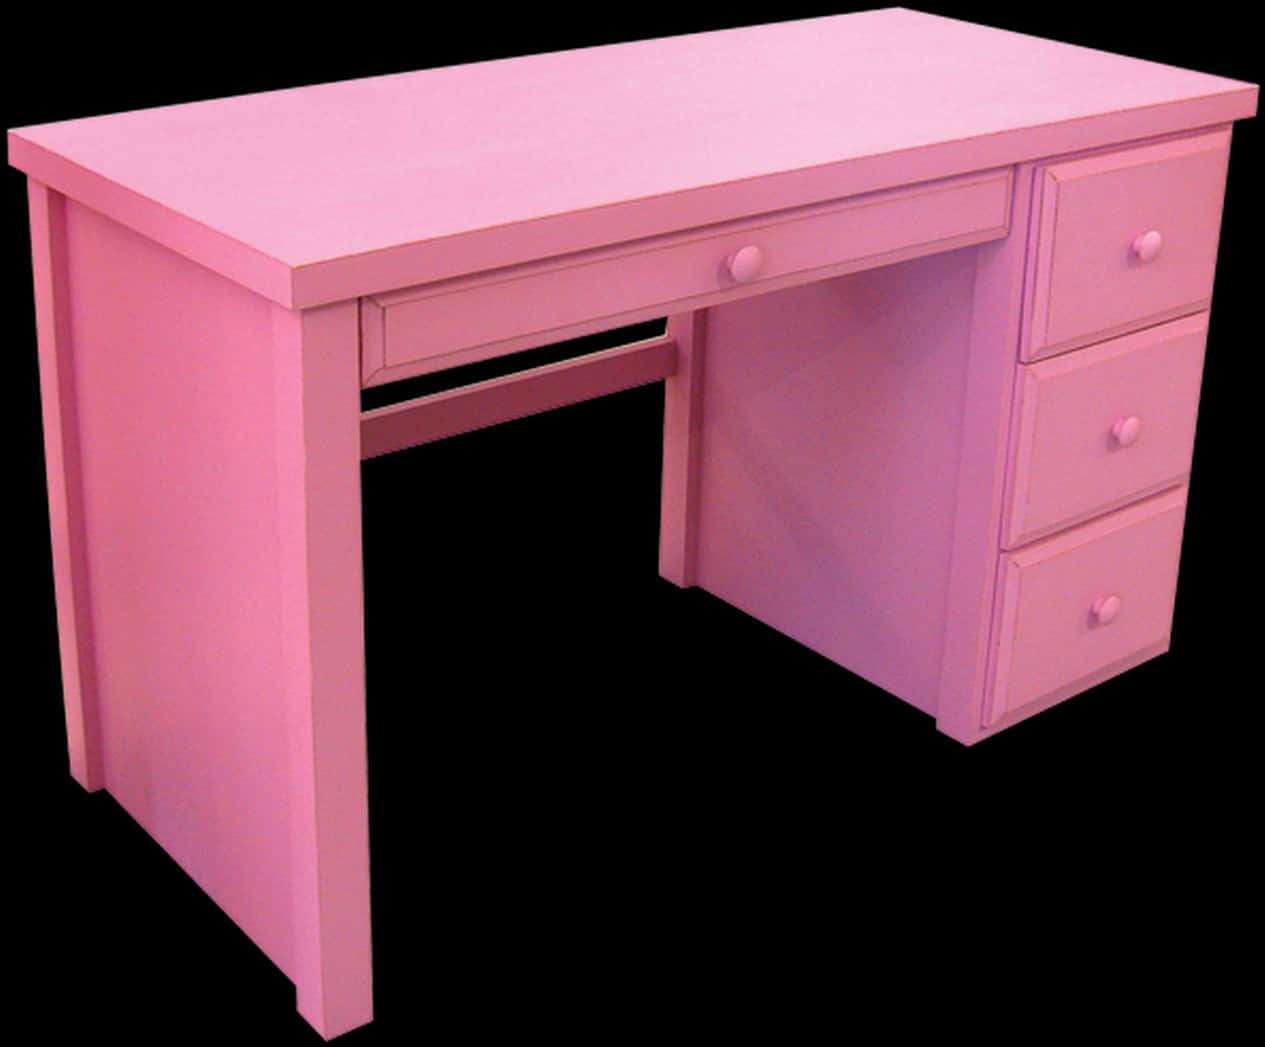 A Pink Desk With Drawers